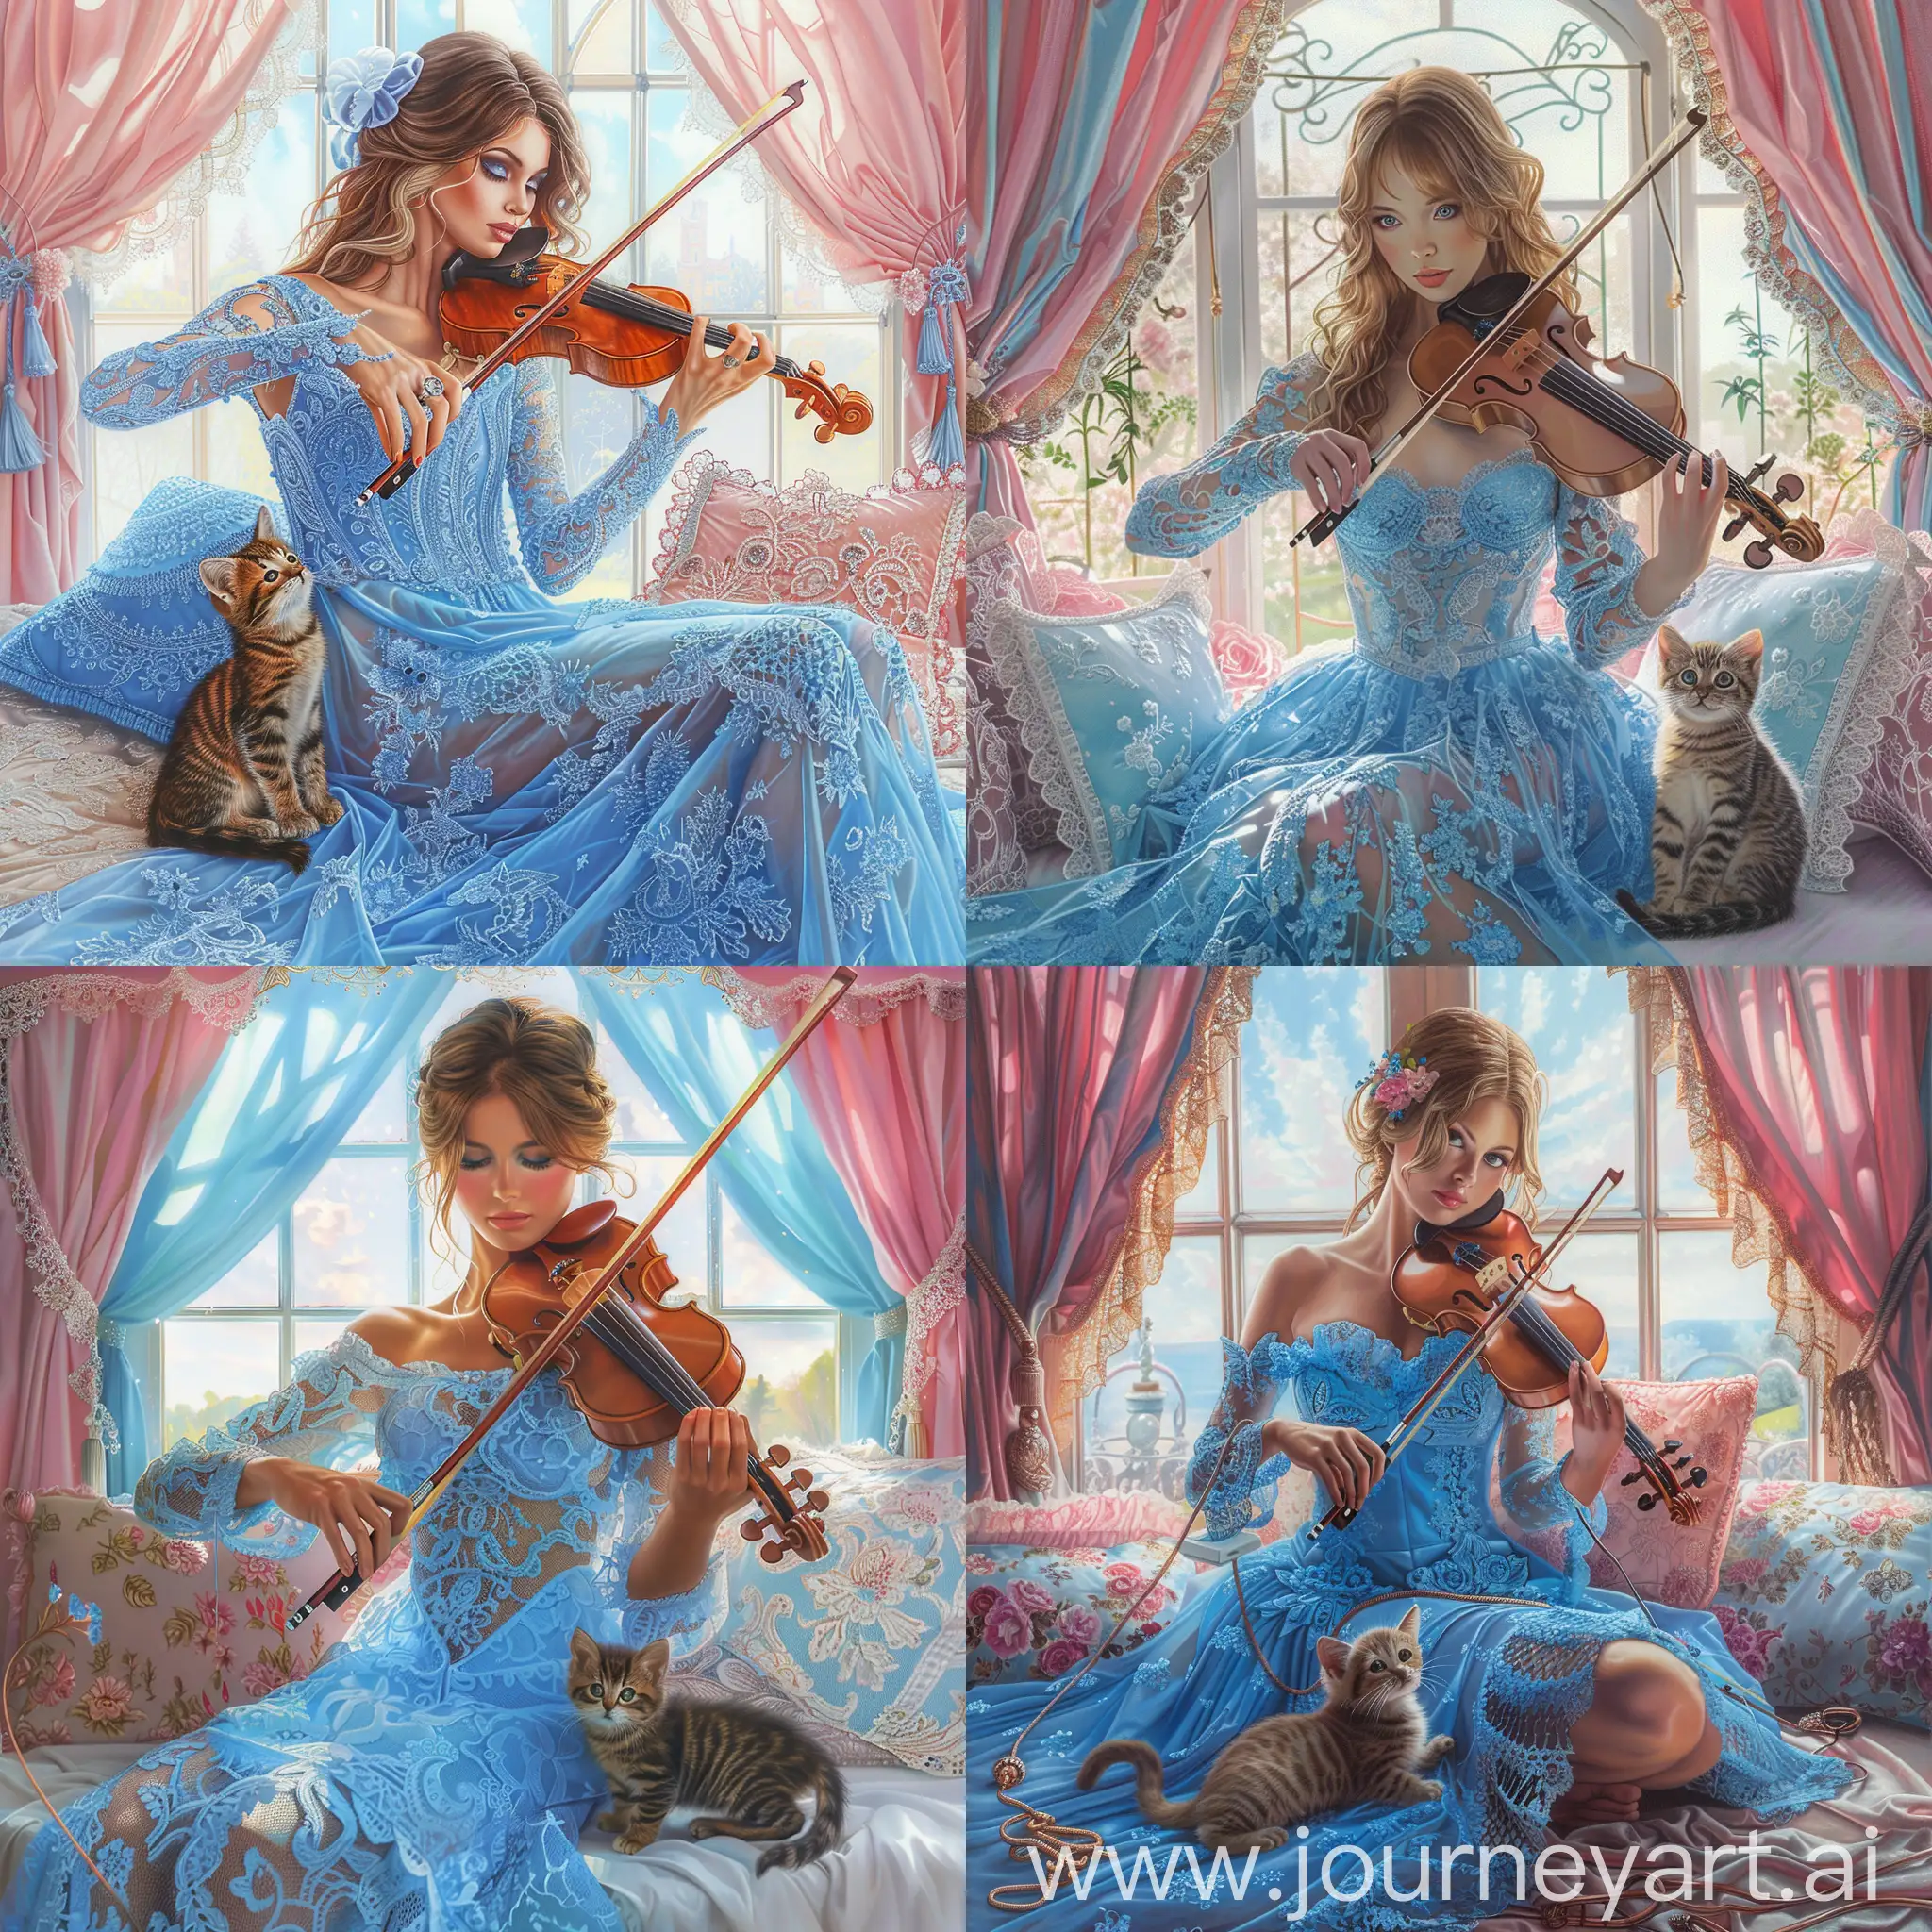 Elegant-Lady-Playing-Violin-with-Kitten-in-Sunlit-Room